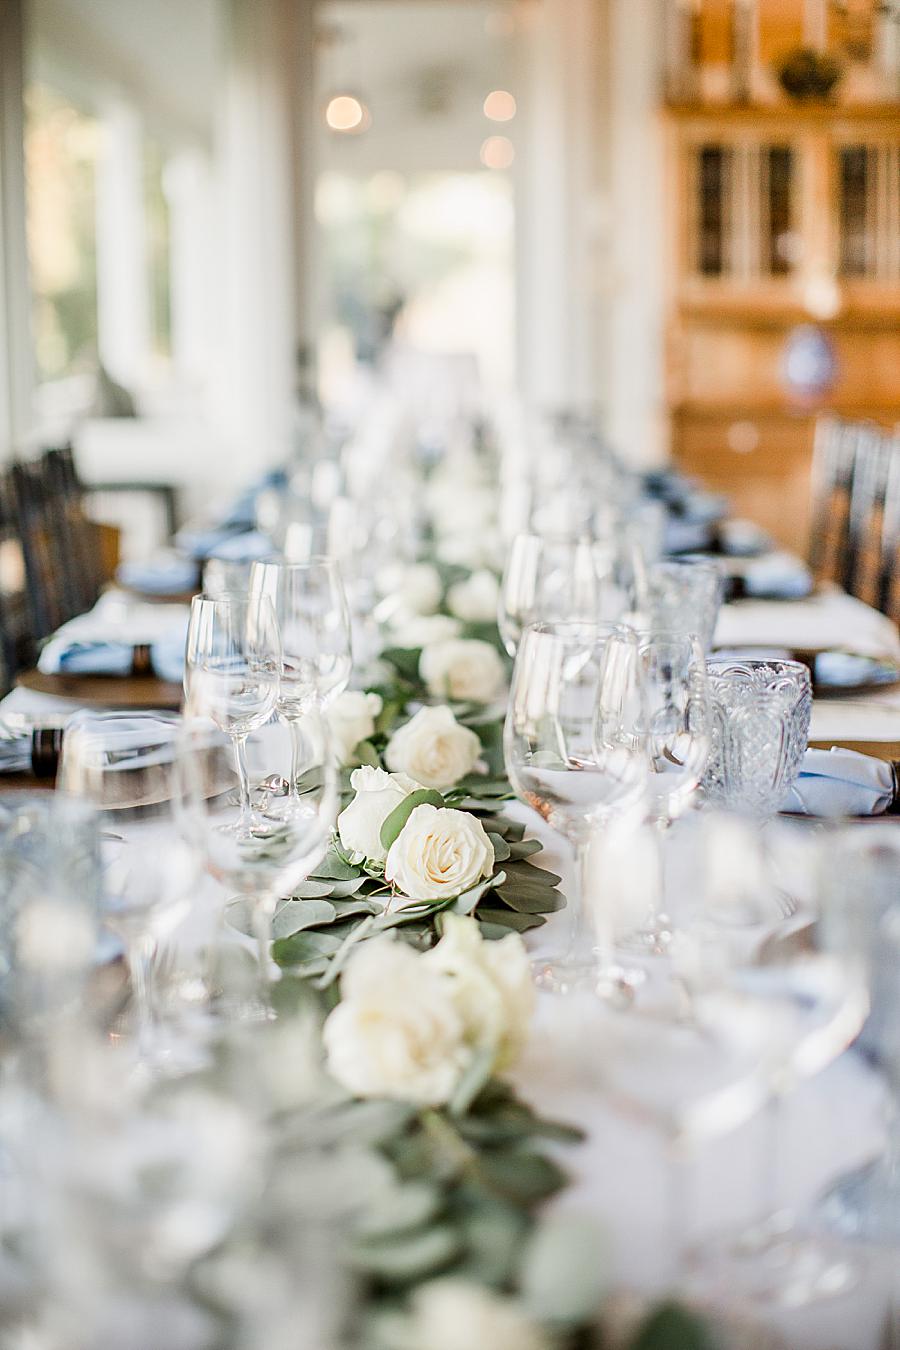 Rehearsal dinner centerpiece at this Marblegate Farm Wedding by Knoxville Wedding Photographer, Amanda May Photos.